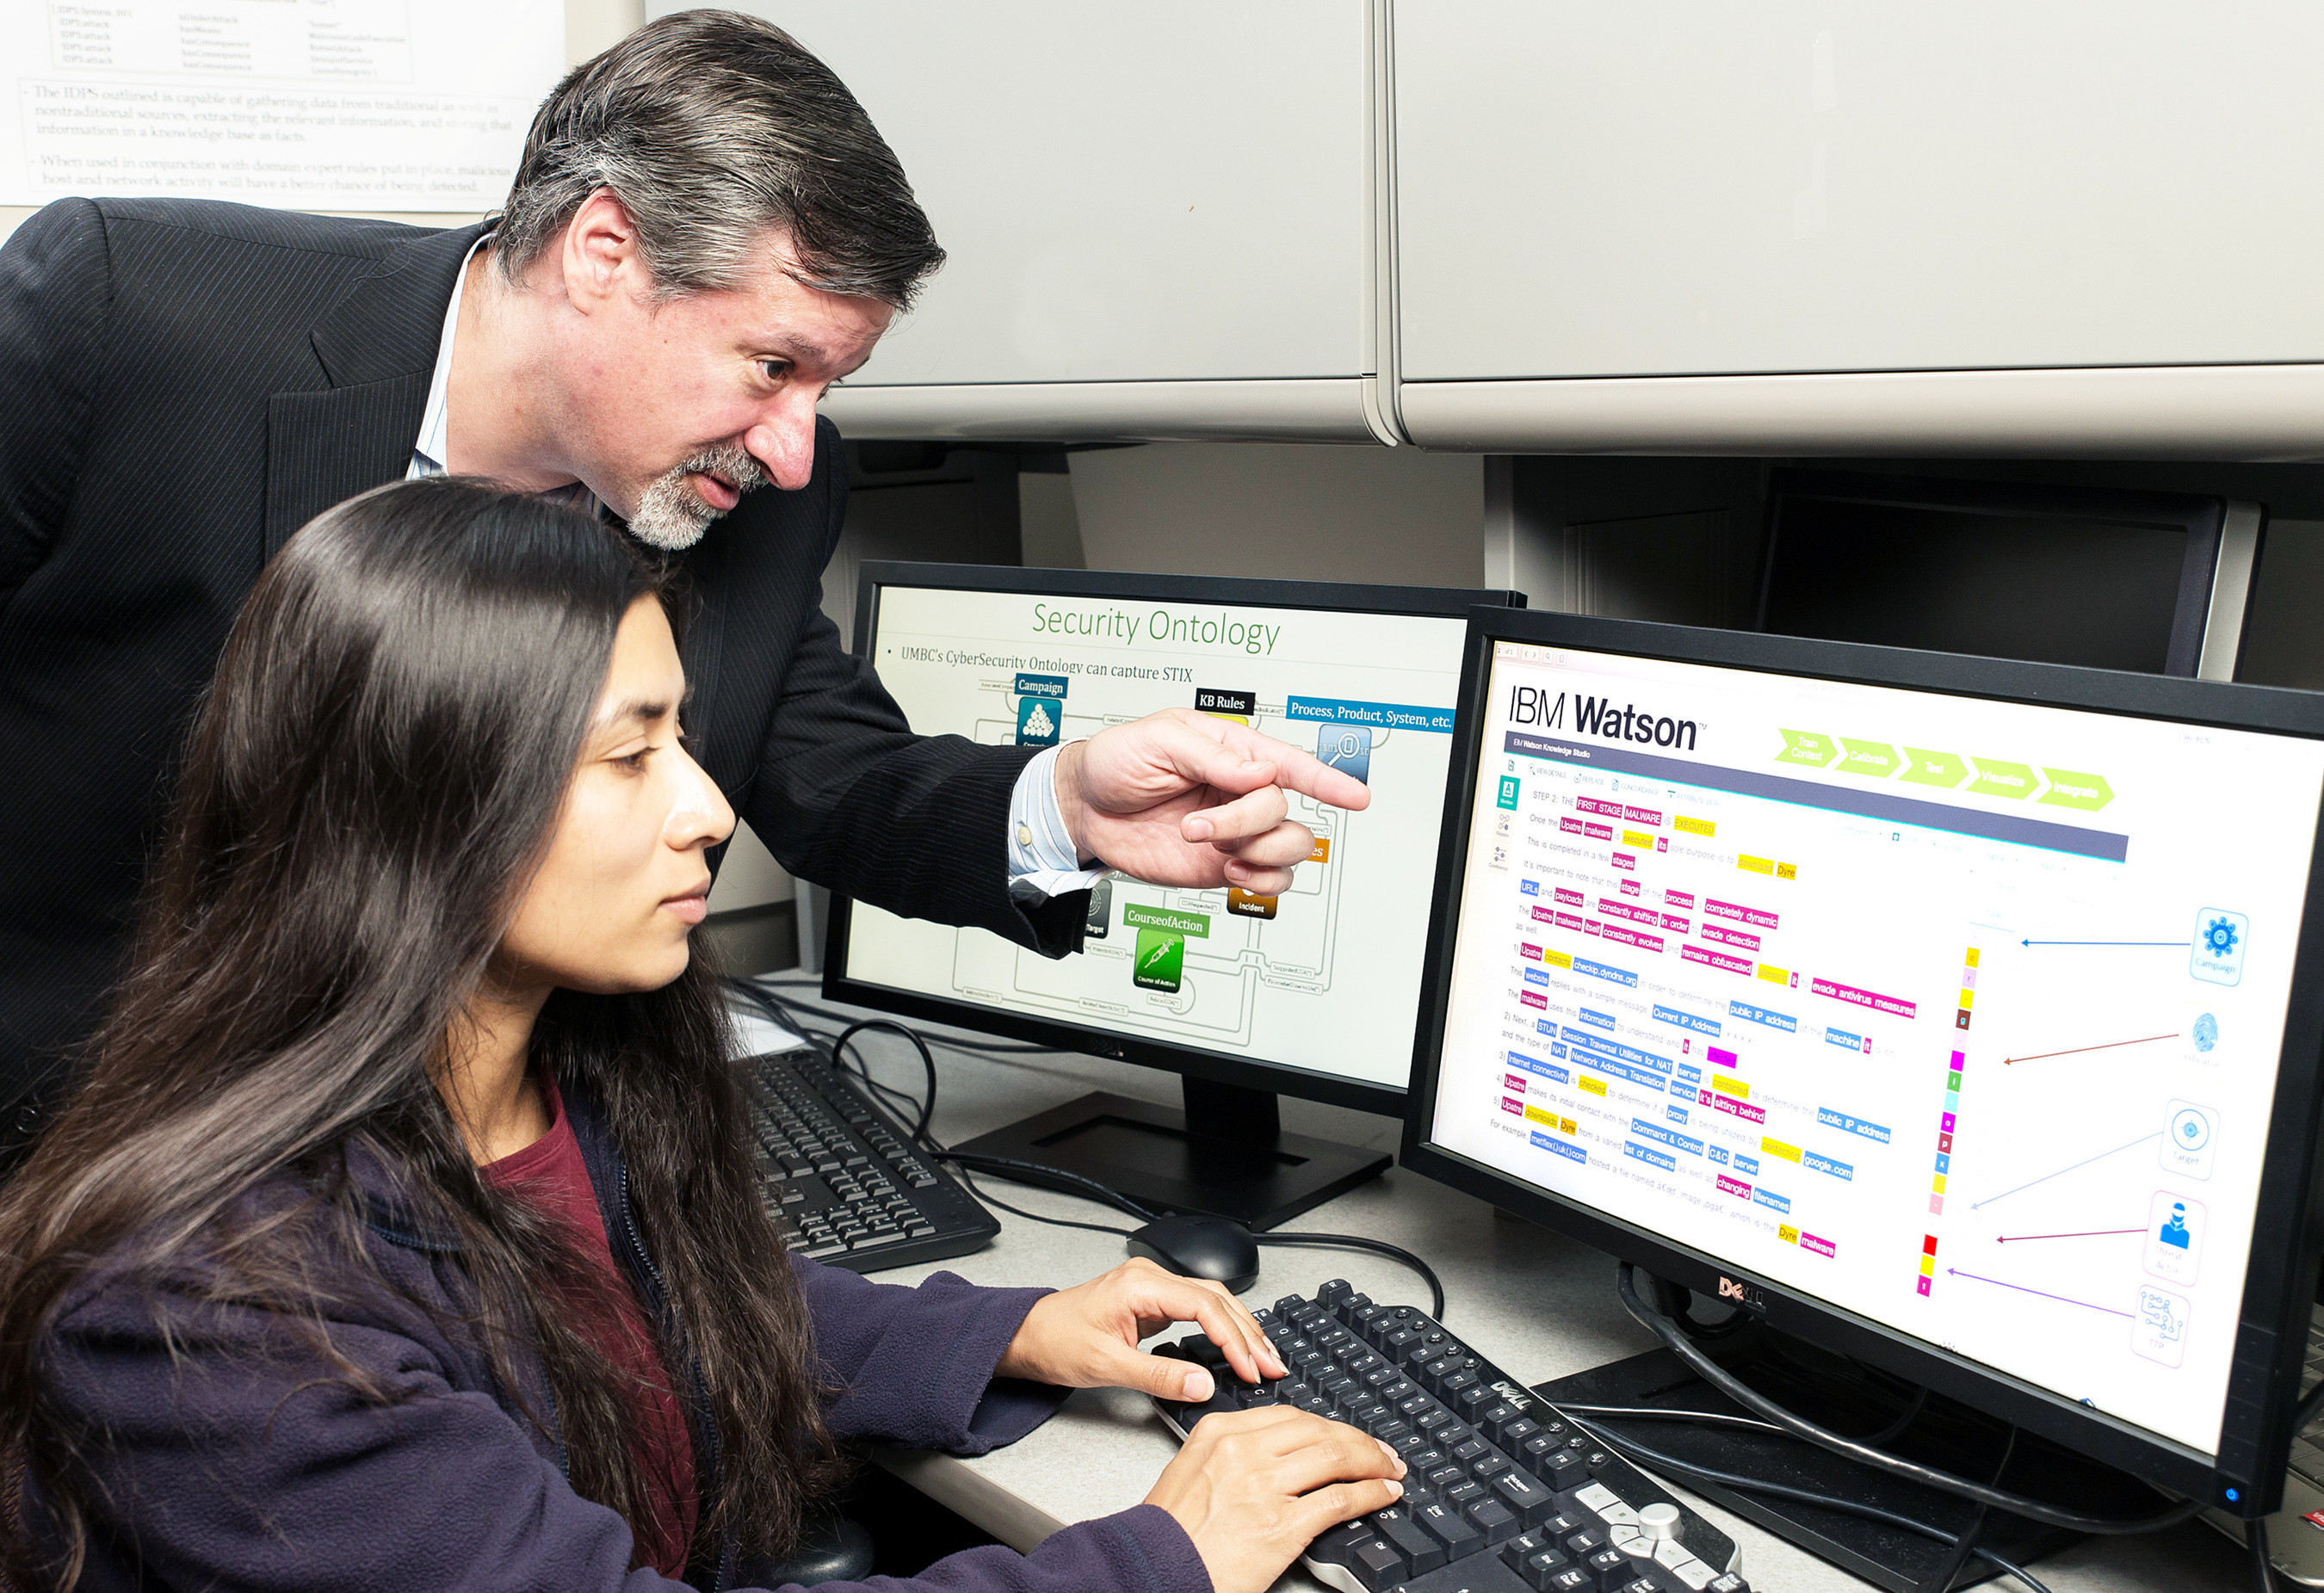 IBM's Chief Watson Security Architect Jeb Linton demonstrating to University of Maryland Baltimore County student Lisa Mathews how to teach IBM's Watson the language of security, Tuesday, May 10, 2016, Baltimore, MD. IBM will work with 8 universities to train Watson for Cyber Security, so that the next generation of security professionals can leverage the power of "cognitive" technology to defend against cyberattacks.  (Mitro Hood/Feature Photo Service for IBM)